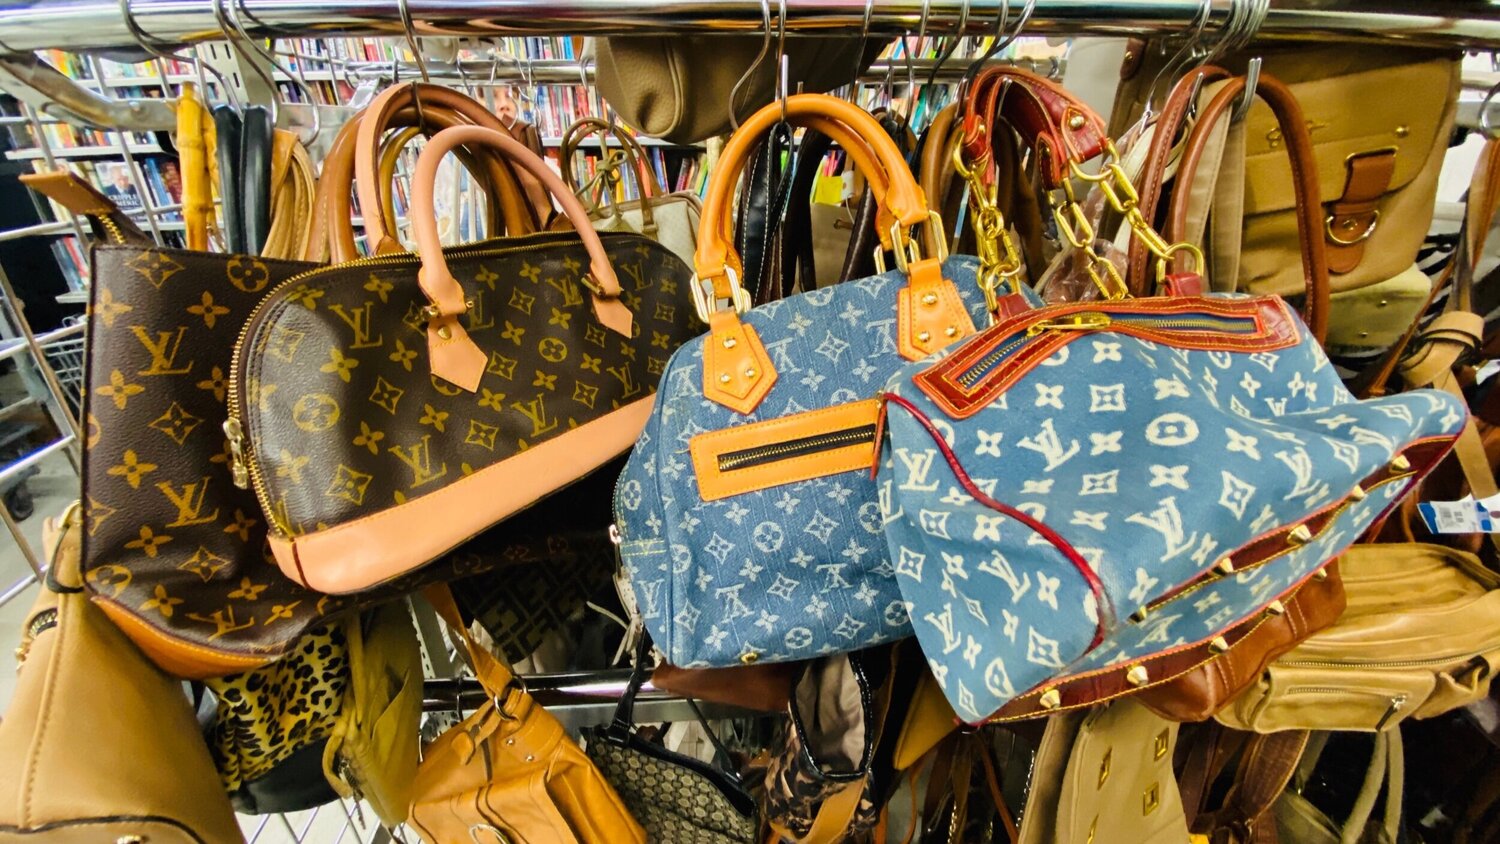 louis vuitton at the thrift — Goodwill Hunting — itsHadrian